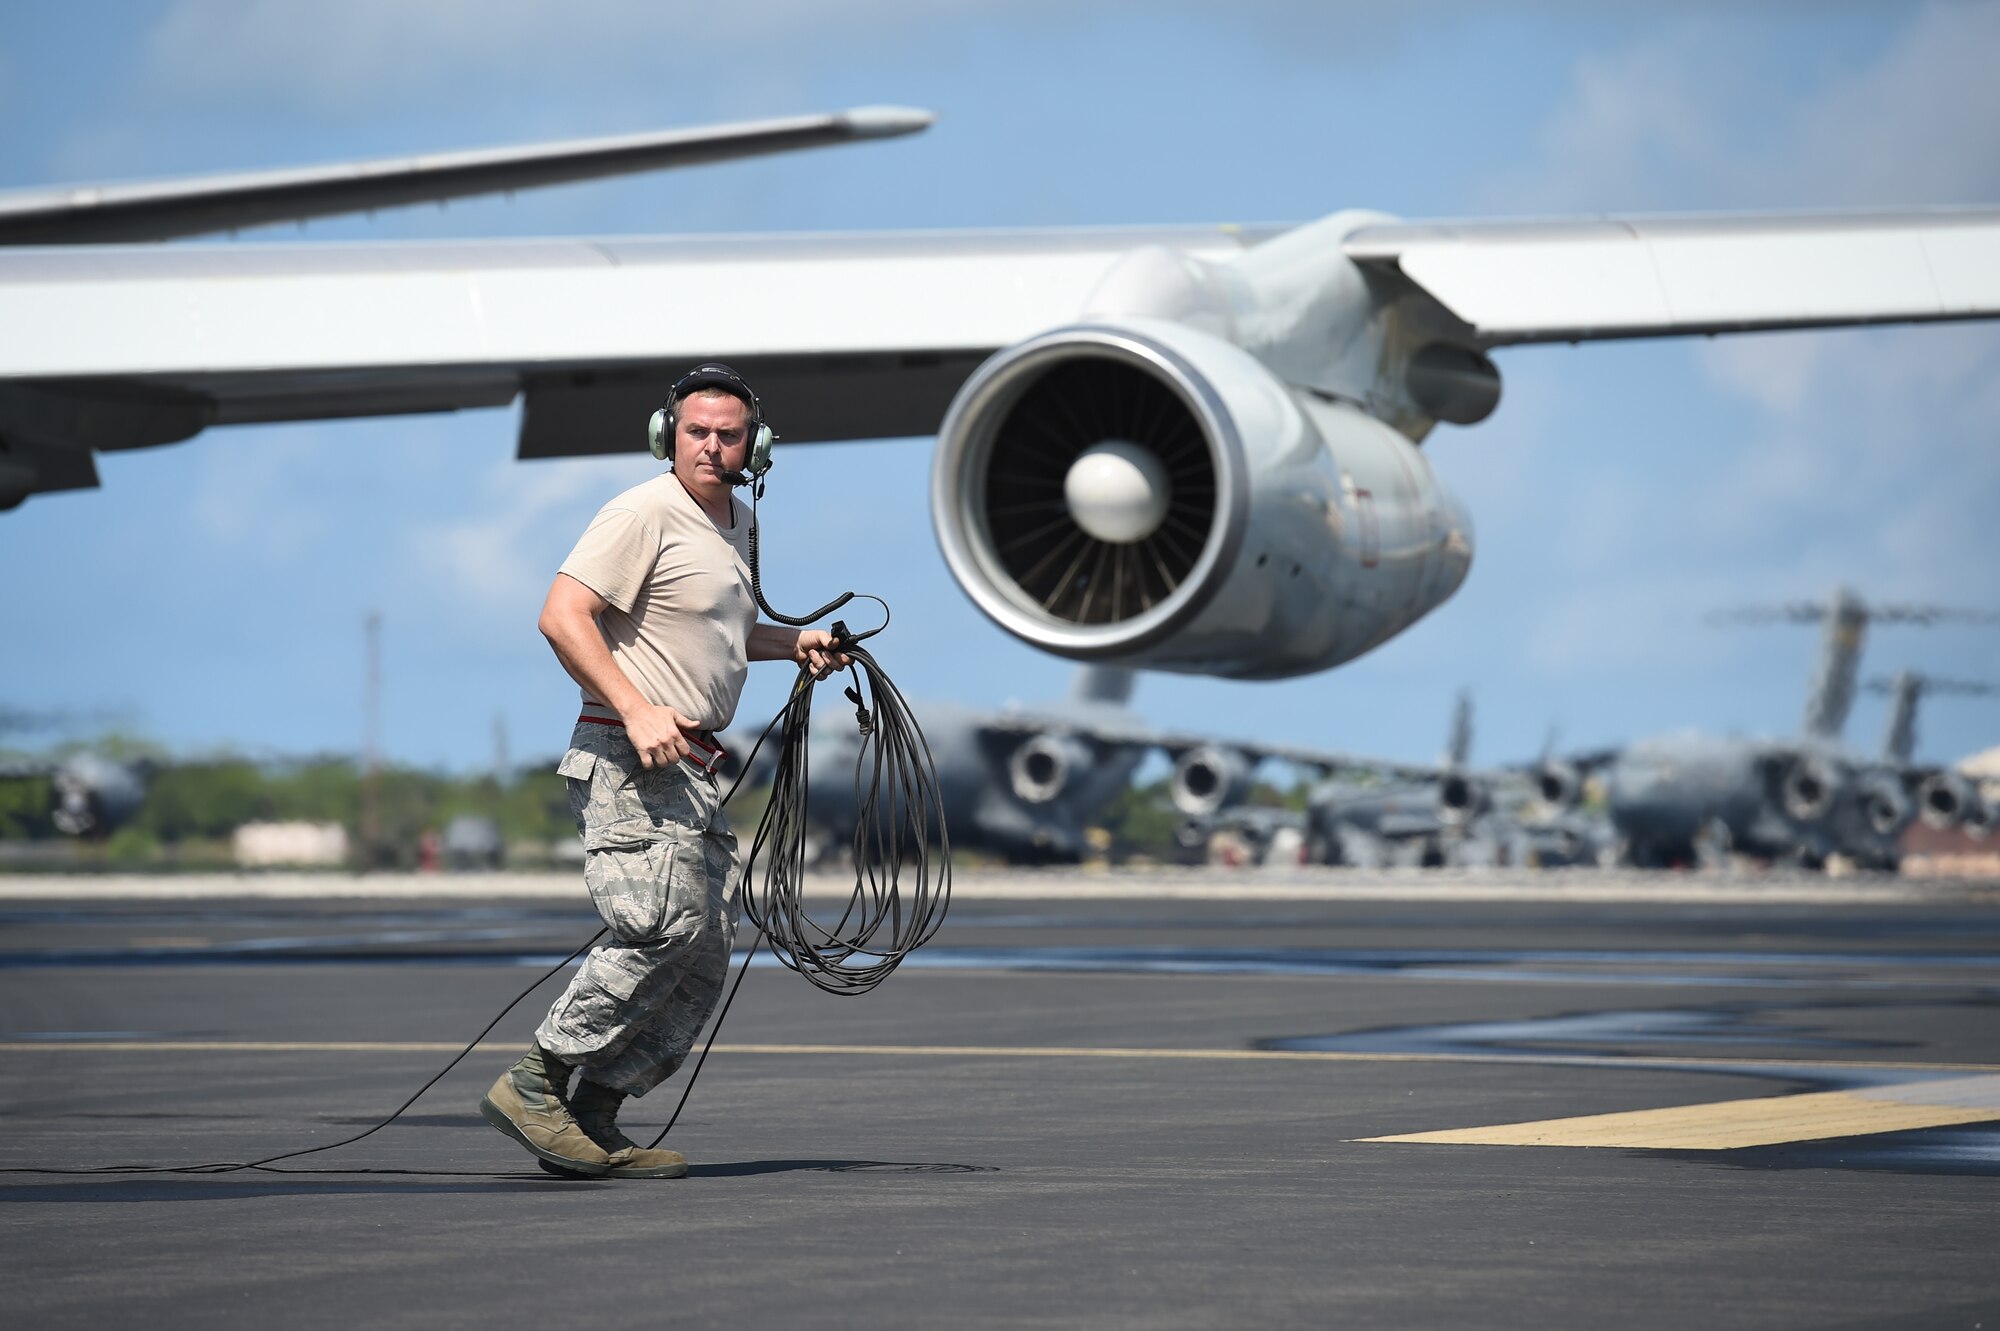 Tech. Sgt. Robert Adams, a crew chief assigned to the 513th Aircraft Maintenance Squadron, moves to safety July 19, 2016, at Joint Base Pearl Harbor-Hickam, Hawaii, as an E-3 Sentry flown by Reservists from the 513th Air Control Group prepares to taxi before a mission in support of Rim of the Pacific 2016. More than 125 Airmen from the 513th Air Control Group and 552nd Air Control Wing are deployed to Hawaii in support of the RIMPAC 2016 exercise. Twenty-six nations, more than 40 ships and submarines, more than 200 aircraft and 25,000 personnel are participating in RIMPAC from June 30 to Aug. 4, in and around the Hawaiian Islands and Southern California. The world's largest international maritime exercise, RIMPAC provides a unique training opportunity that helps participants foster and sustain the cooperative relationships that are critical to ensuring the safety of sea lanes and security on the world's oceans. RIMPAC 2016 is the 25th exercise in the series that began in 1971. (U.S. Air Force photo by 2nd Lt. Caleb Wanzer)